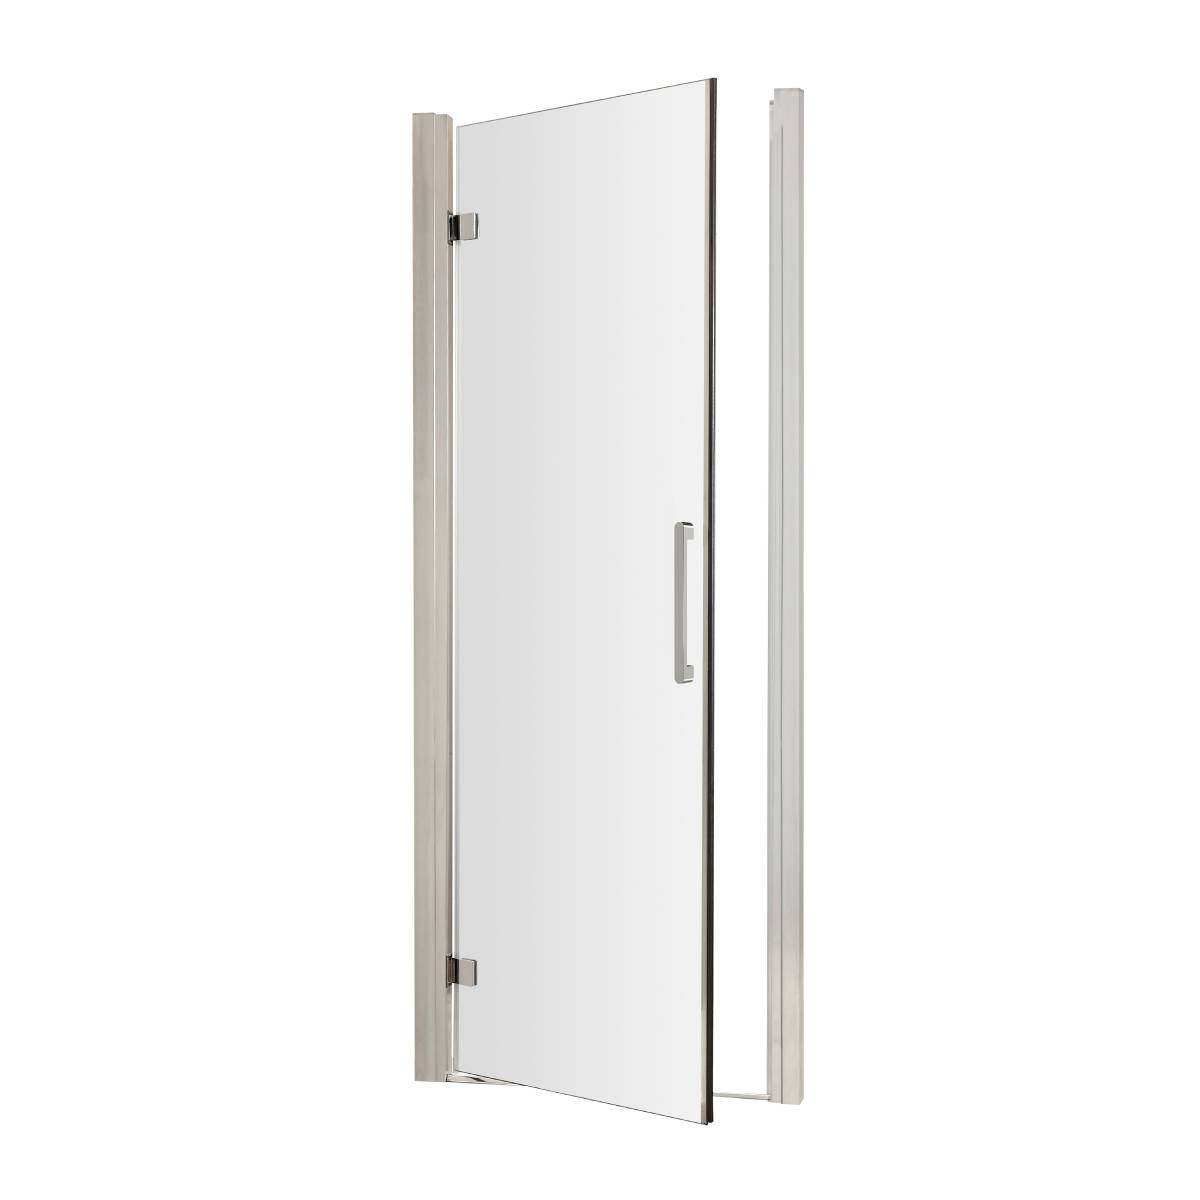 Hudson Reed Apex 800mm Hinged Shower Door with Round Handle MH80H4 (13371)